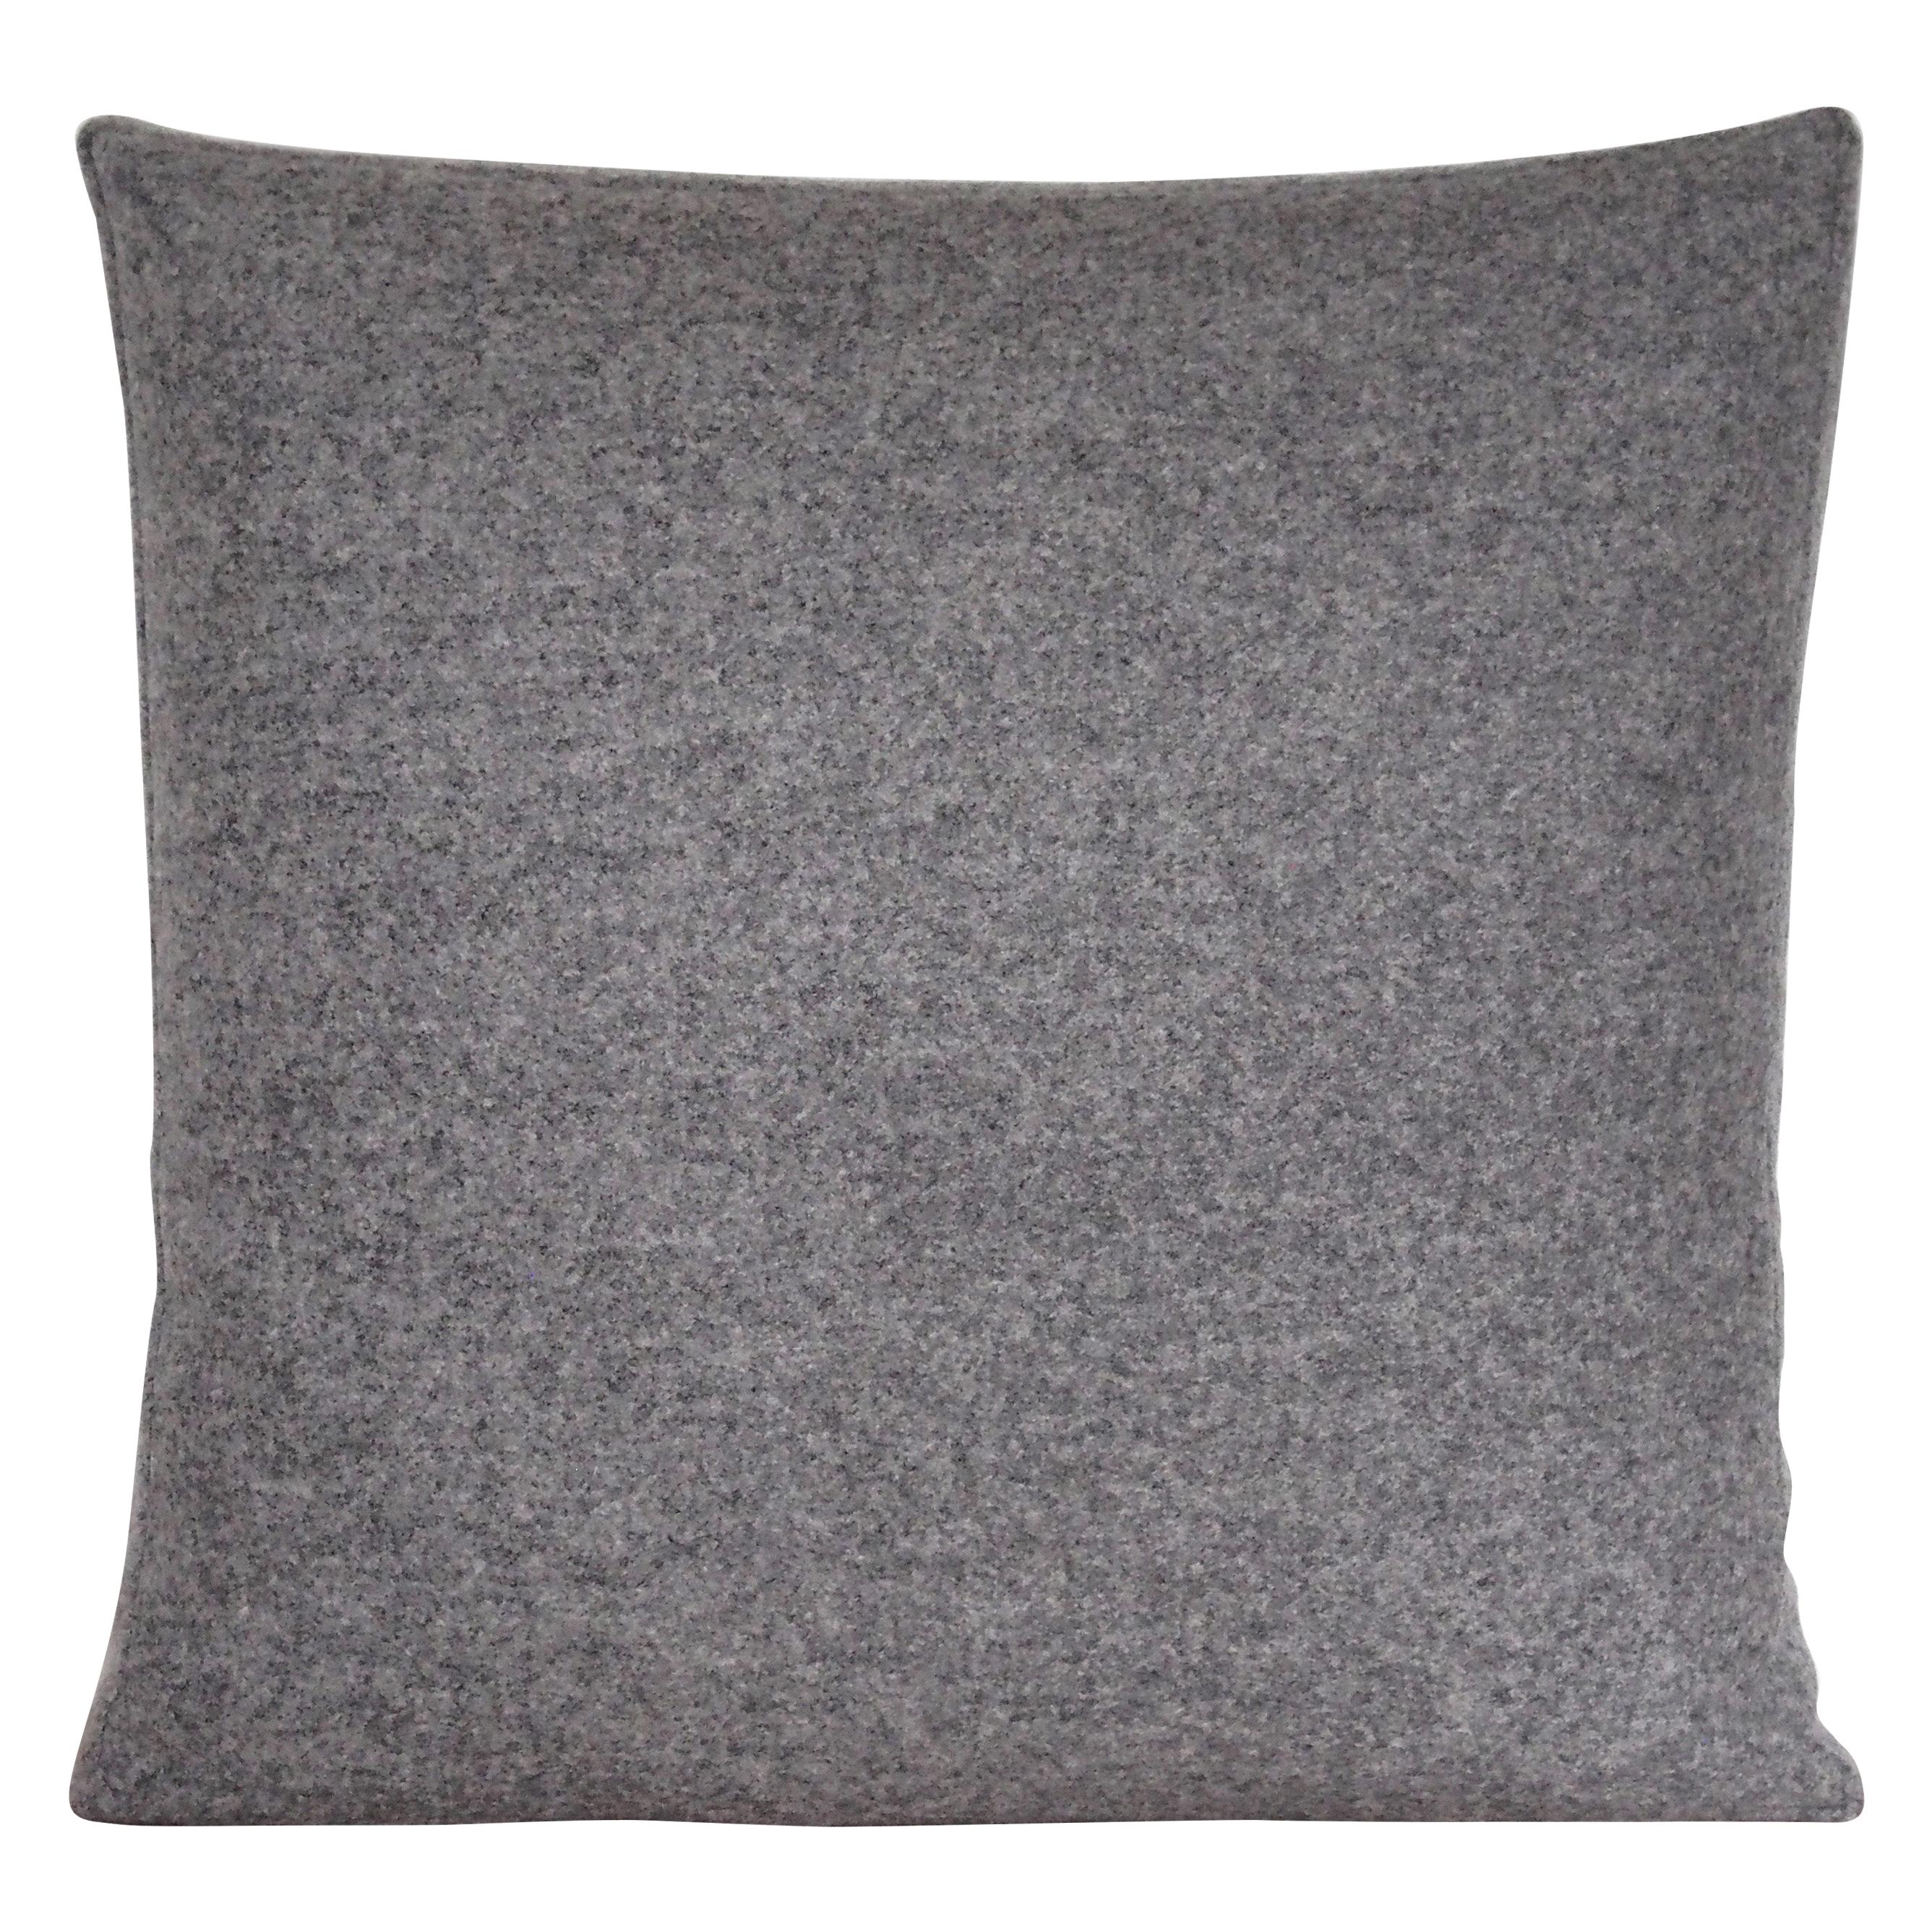 Handcrafted Square Grey Pillow Cushion